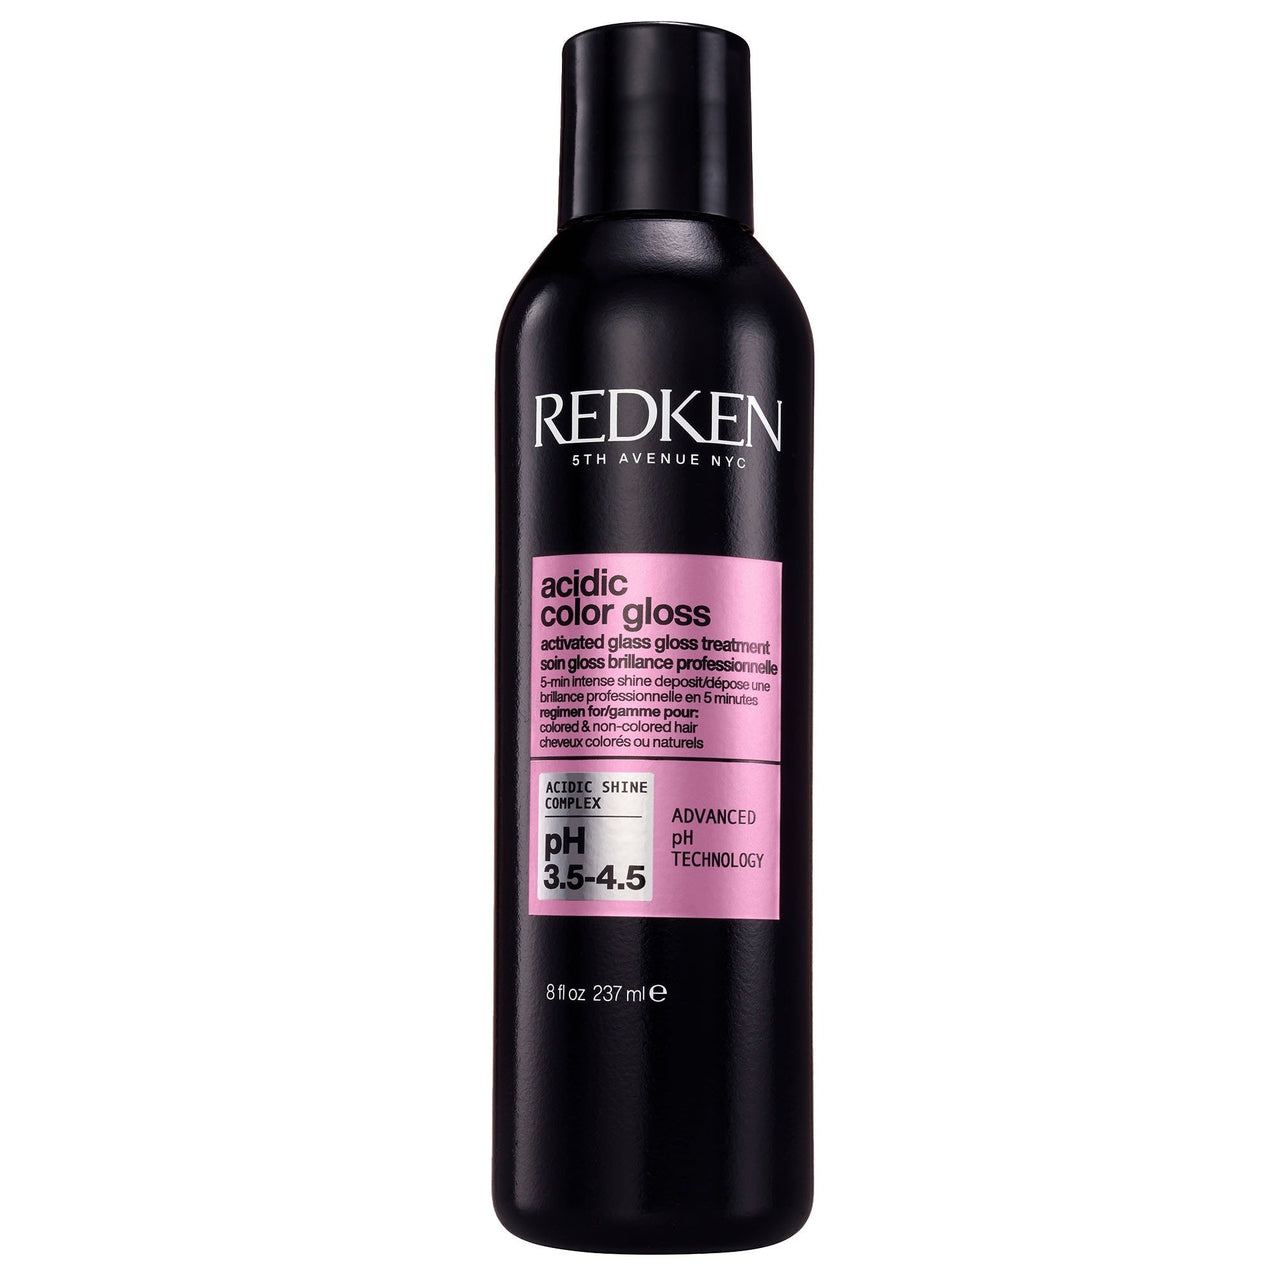 REDKEN_Acidic Color Gloss Activated Glass Gloss Treatment_Cosmetic World